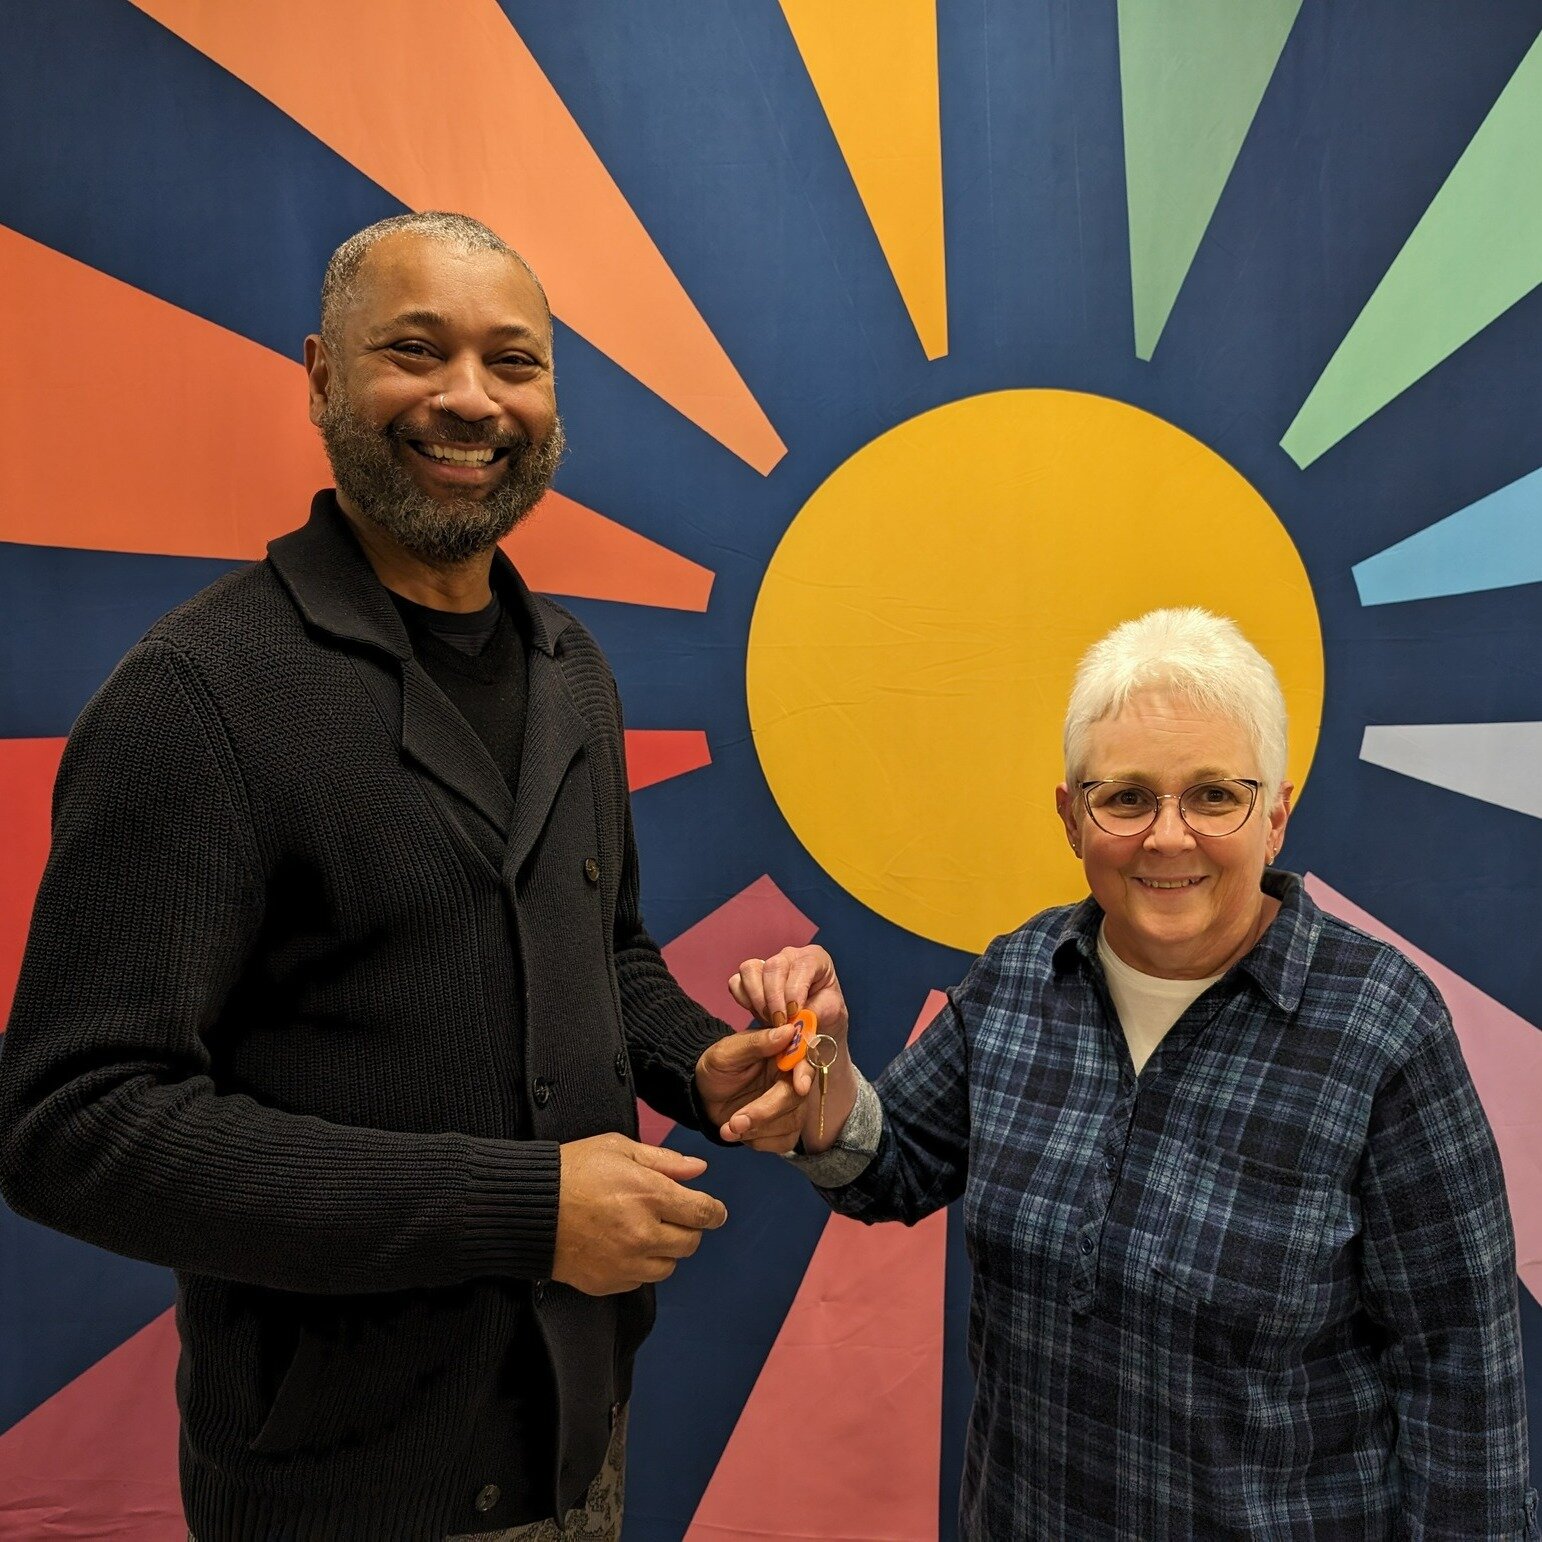 Traverse City has a new Day Program Supervisor! Filling the shoes of the recently retired Becky DeFrance, Alex Gunn has returned to the field where he started his career over a decade ago as a Case Manager overseeing an adult foster care home. &ldquo